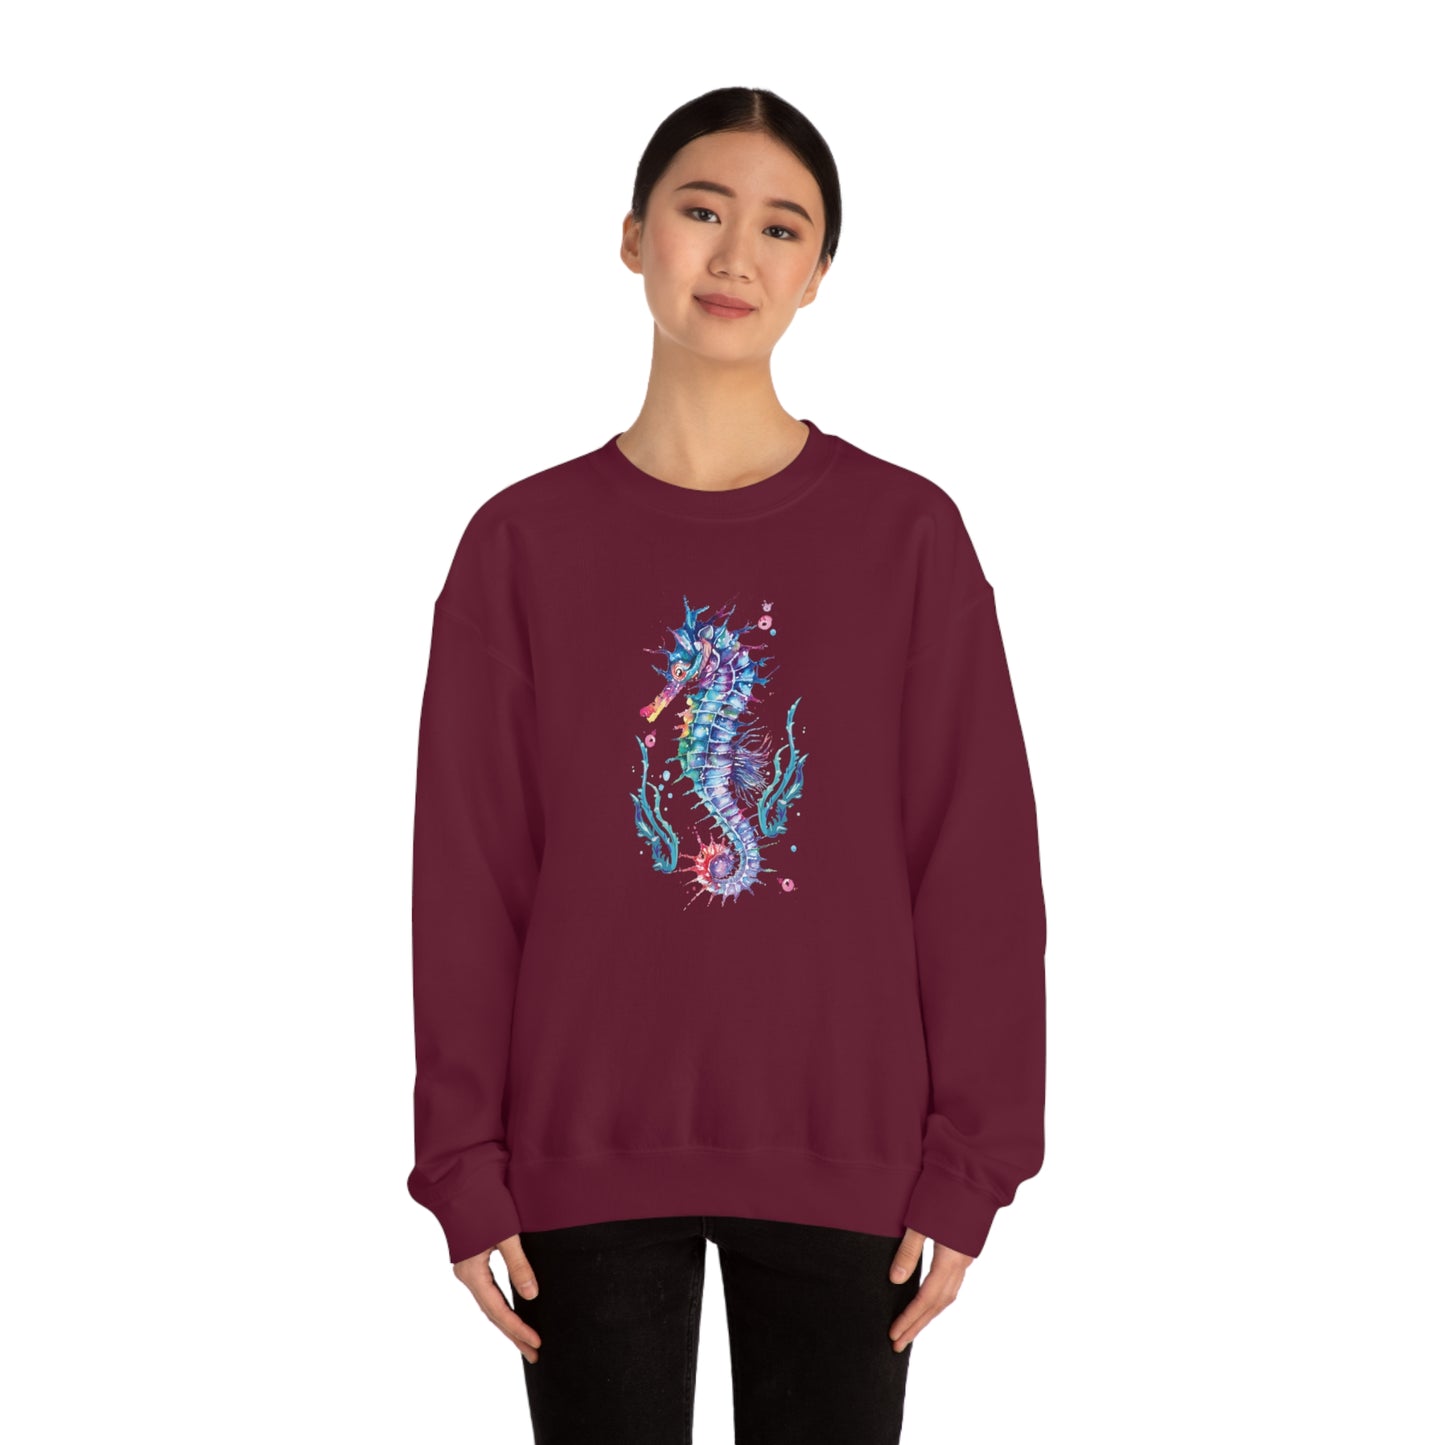 Mock up of a slim woman wearing the Maroon shirt